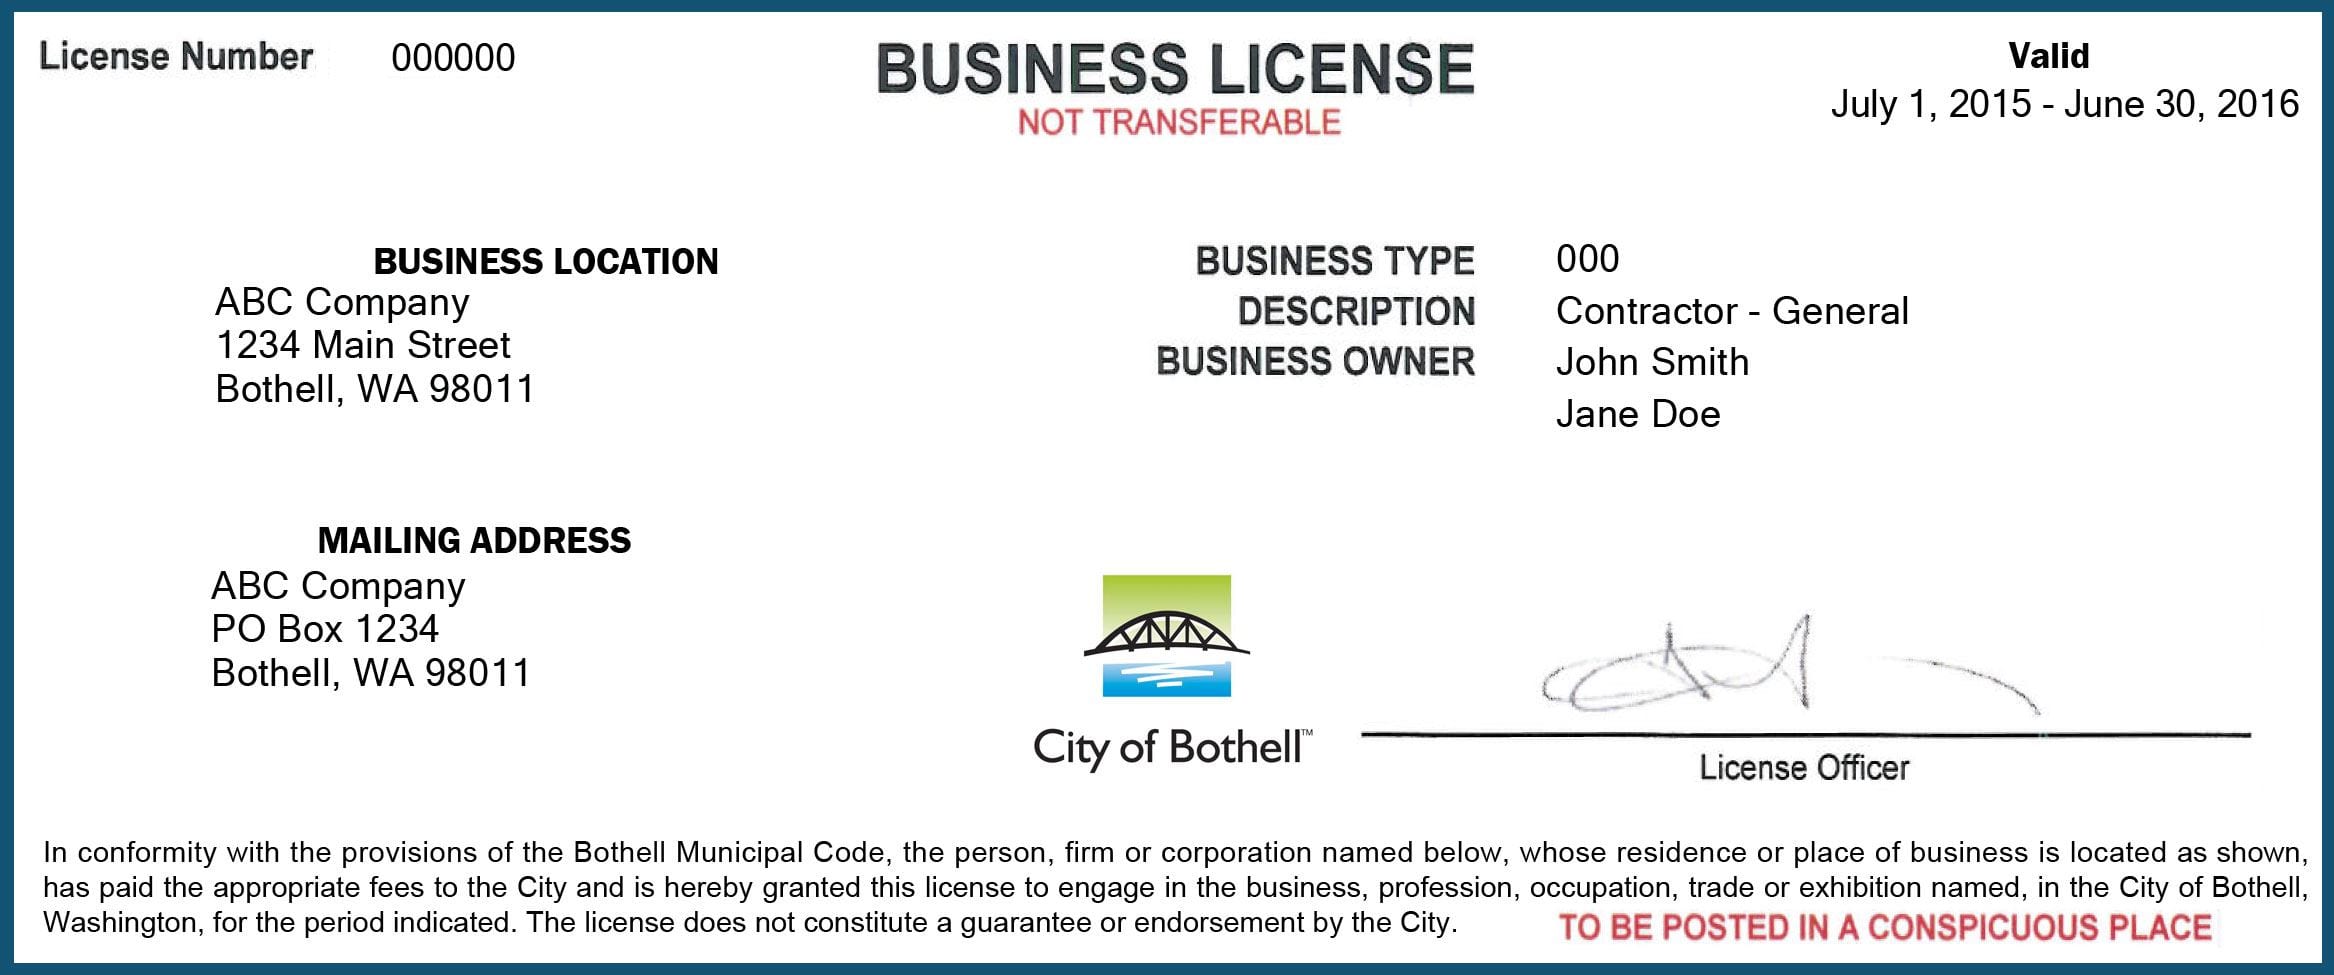 Get Your Business License Online